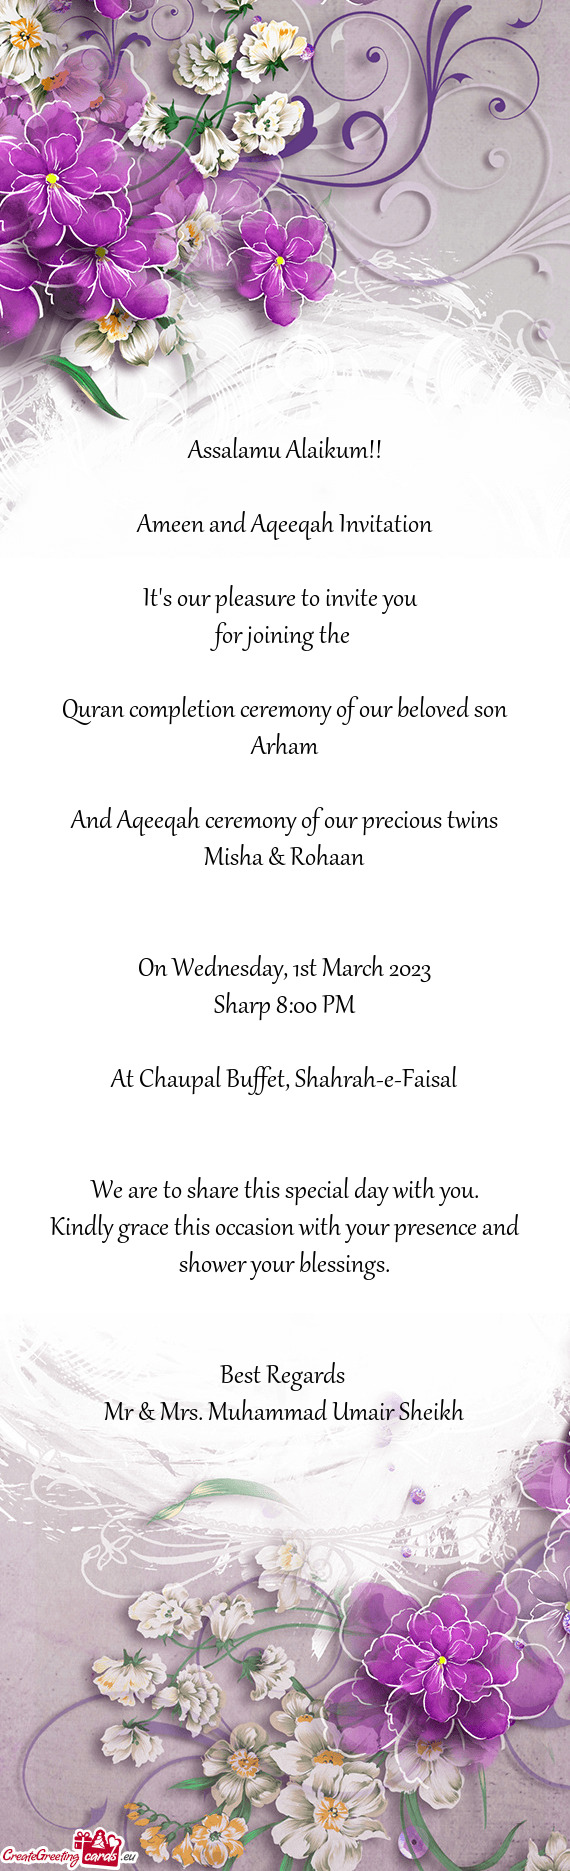 And Aqeeqah ceremony of our precious twins